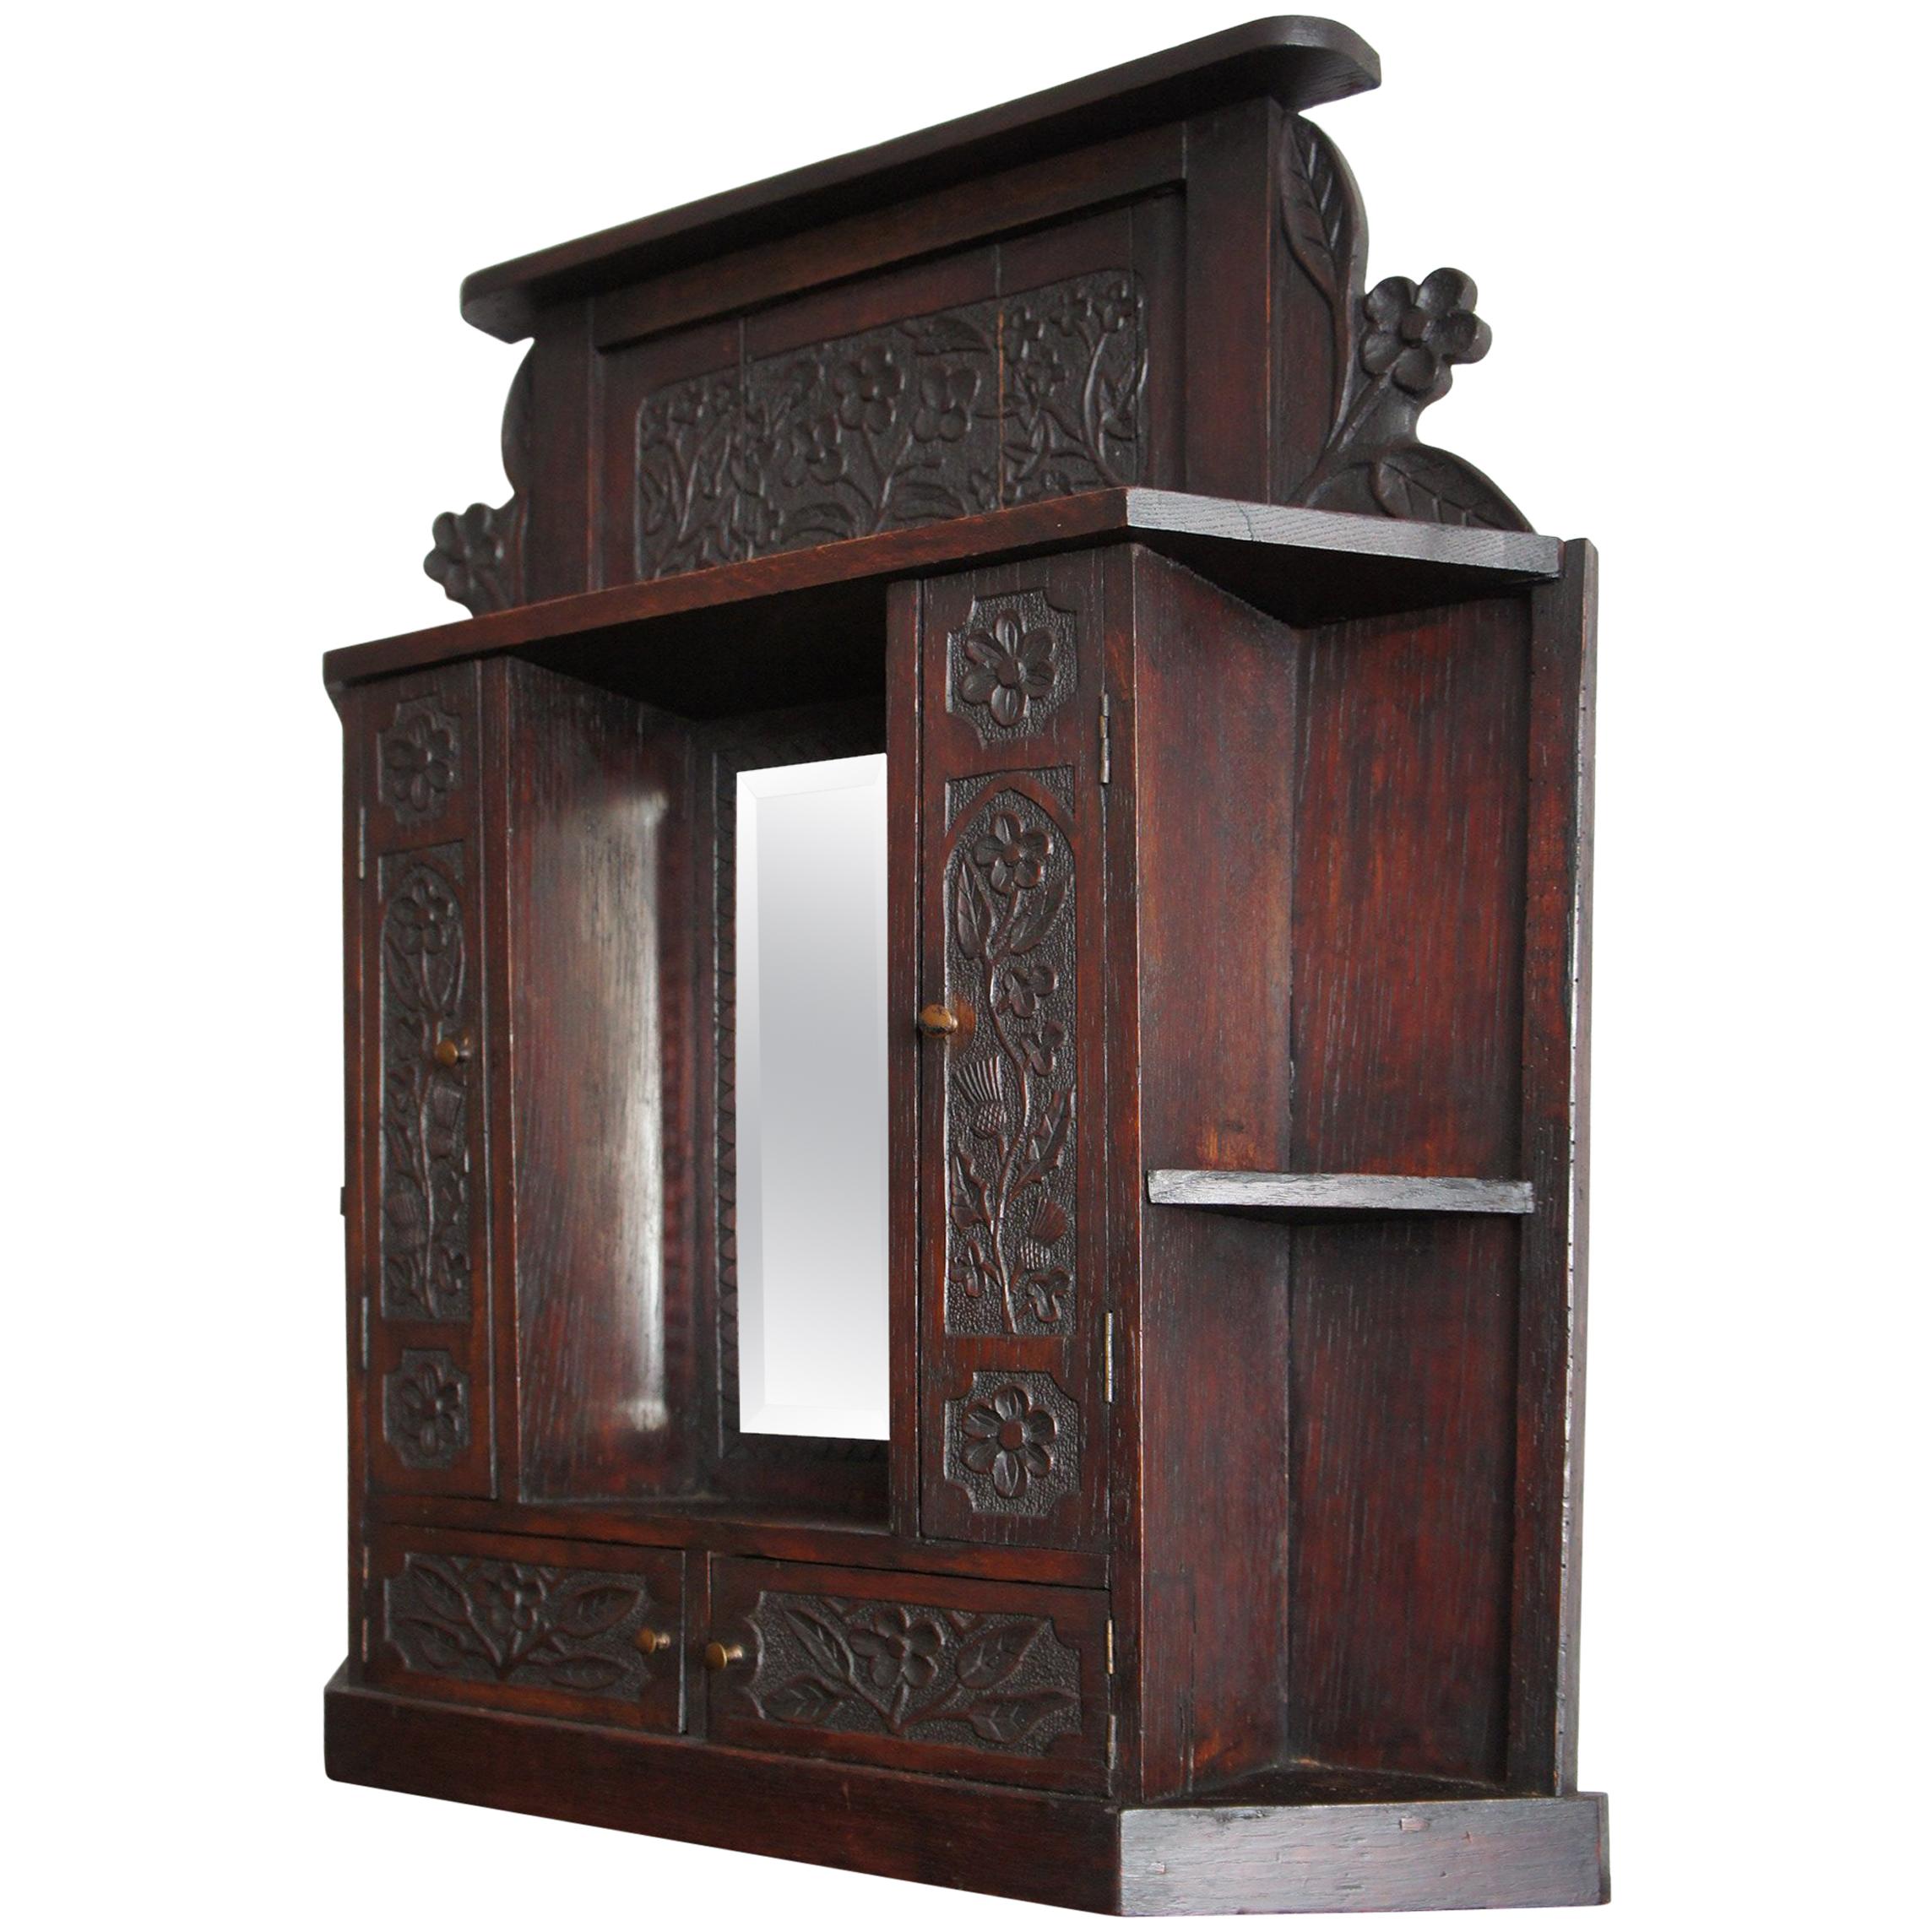 19th Century Handcrafted Oakwood Folk Art Wall Cabinet with Beveled Mirror